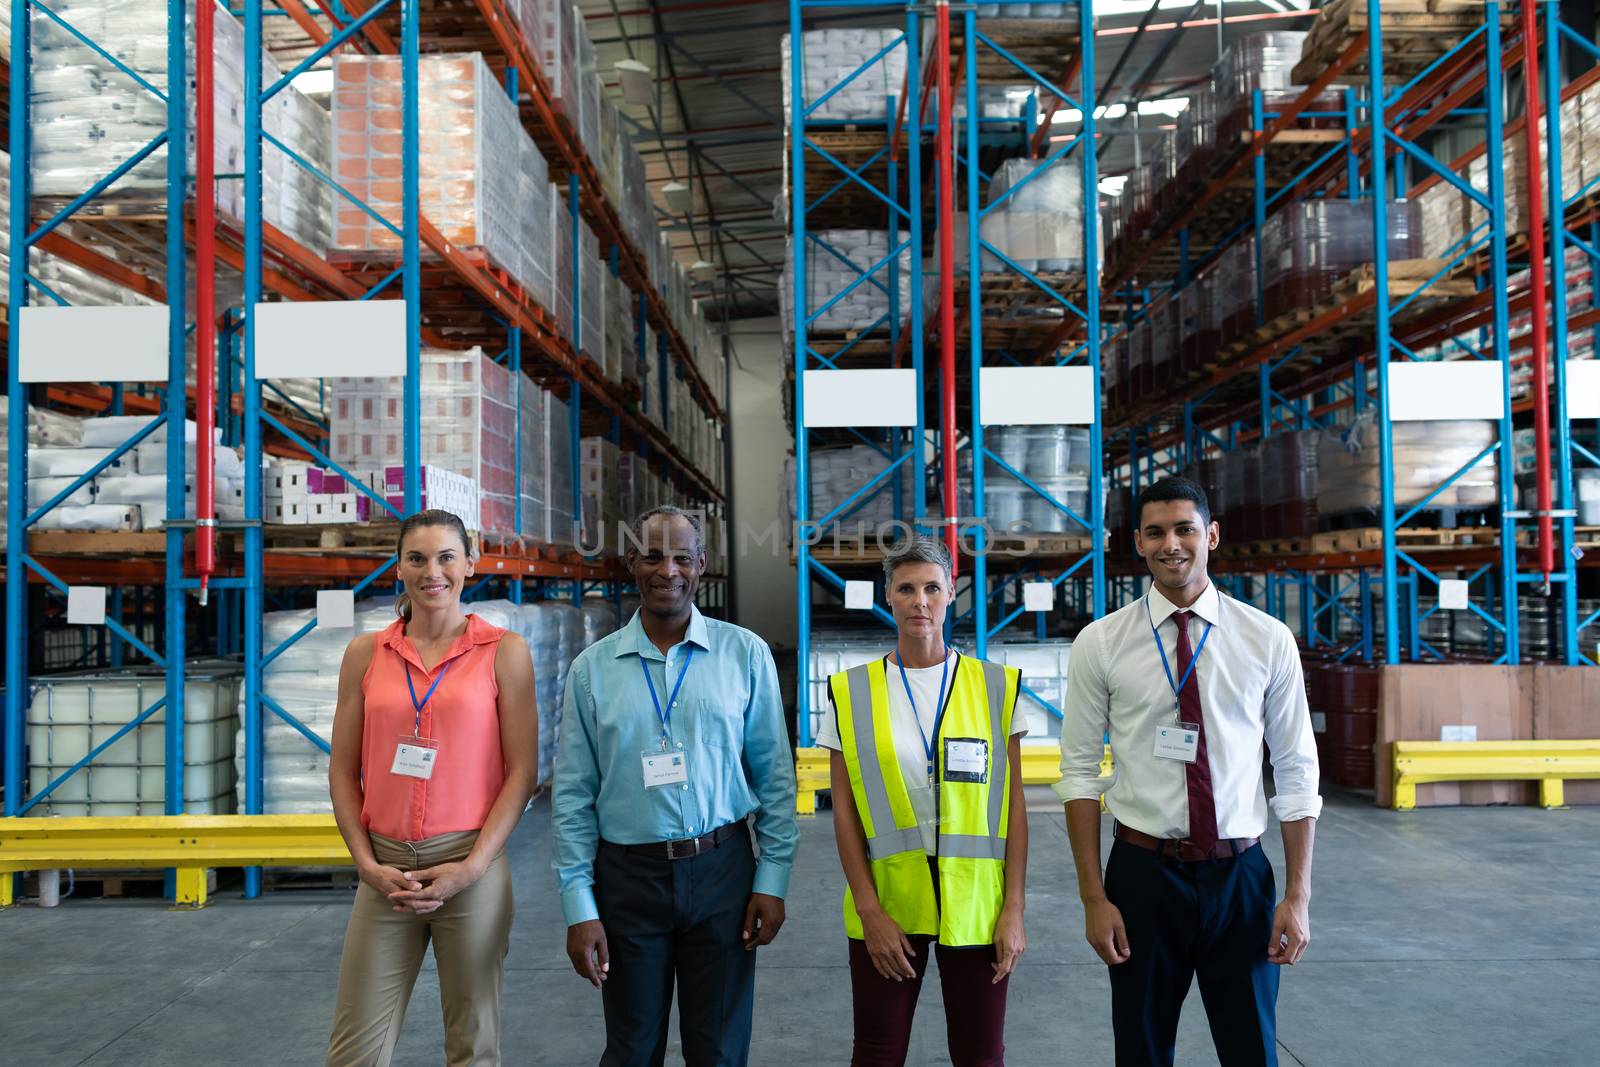 Portrait of confident diverse warehouse staffs standing together in warehouse. This is a freight transportation and distribution warehouse. Industrial and industrial workers concept